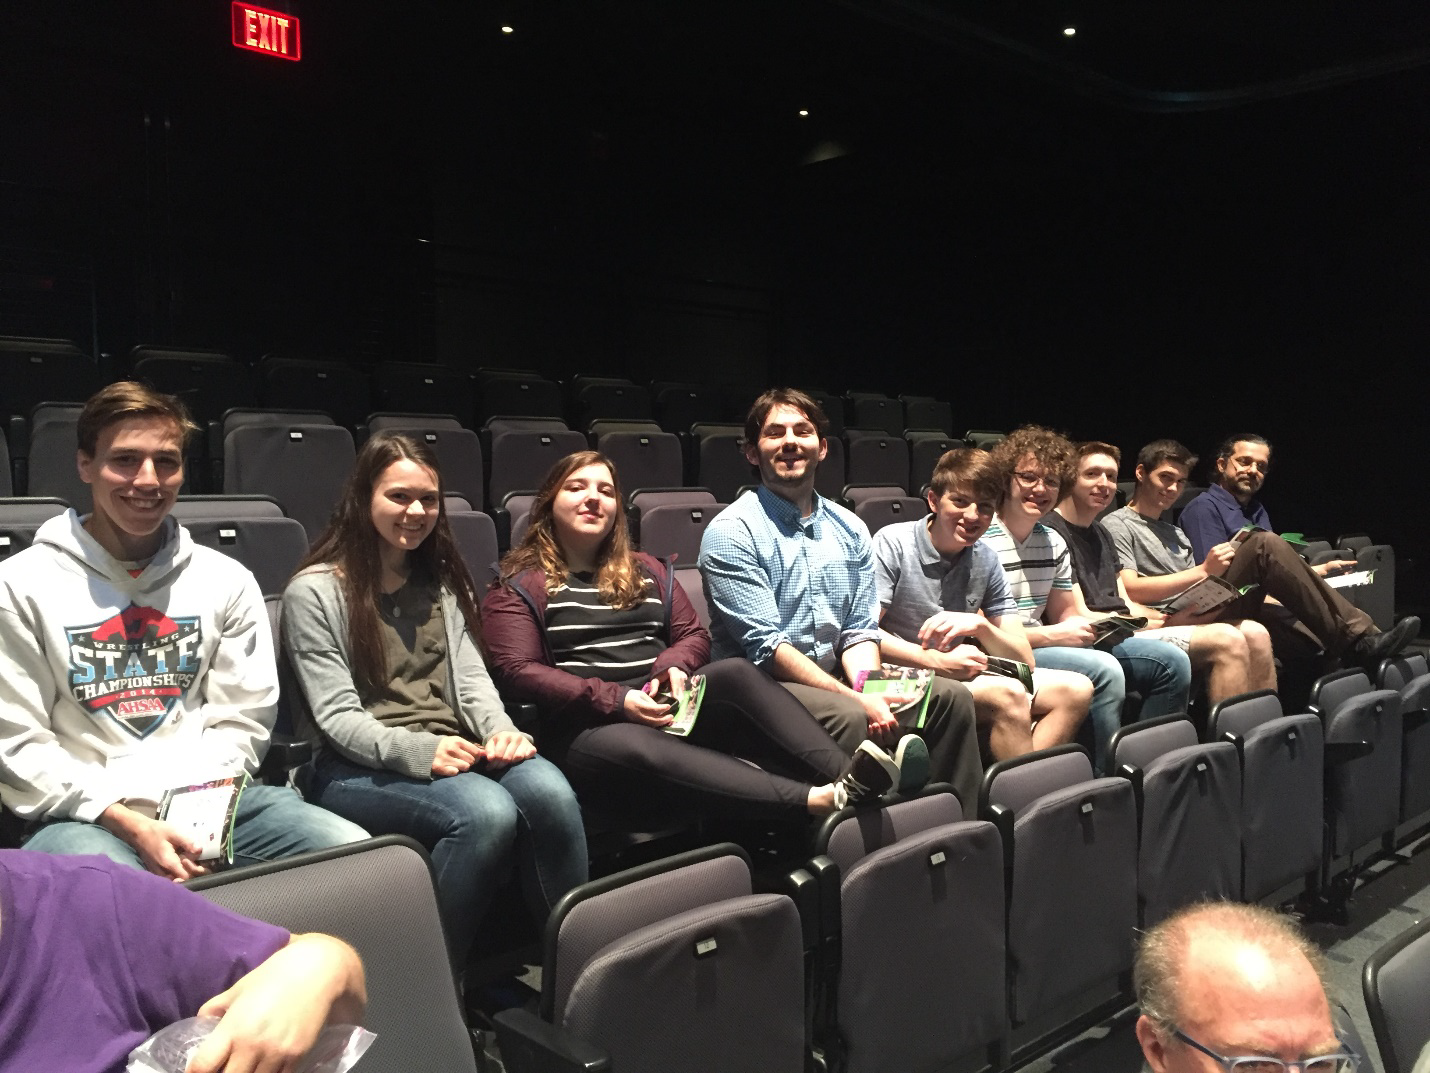 Students await Dr. Levin's talk at the AHA! Festival.